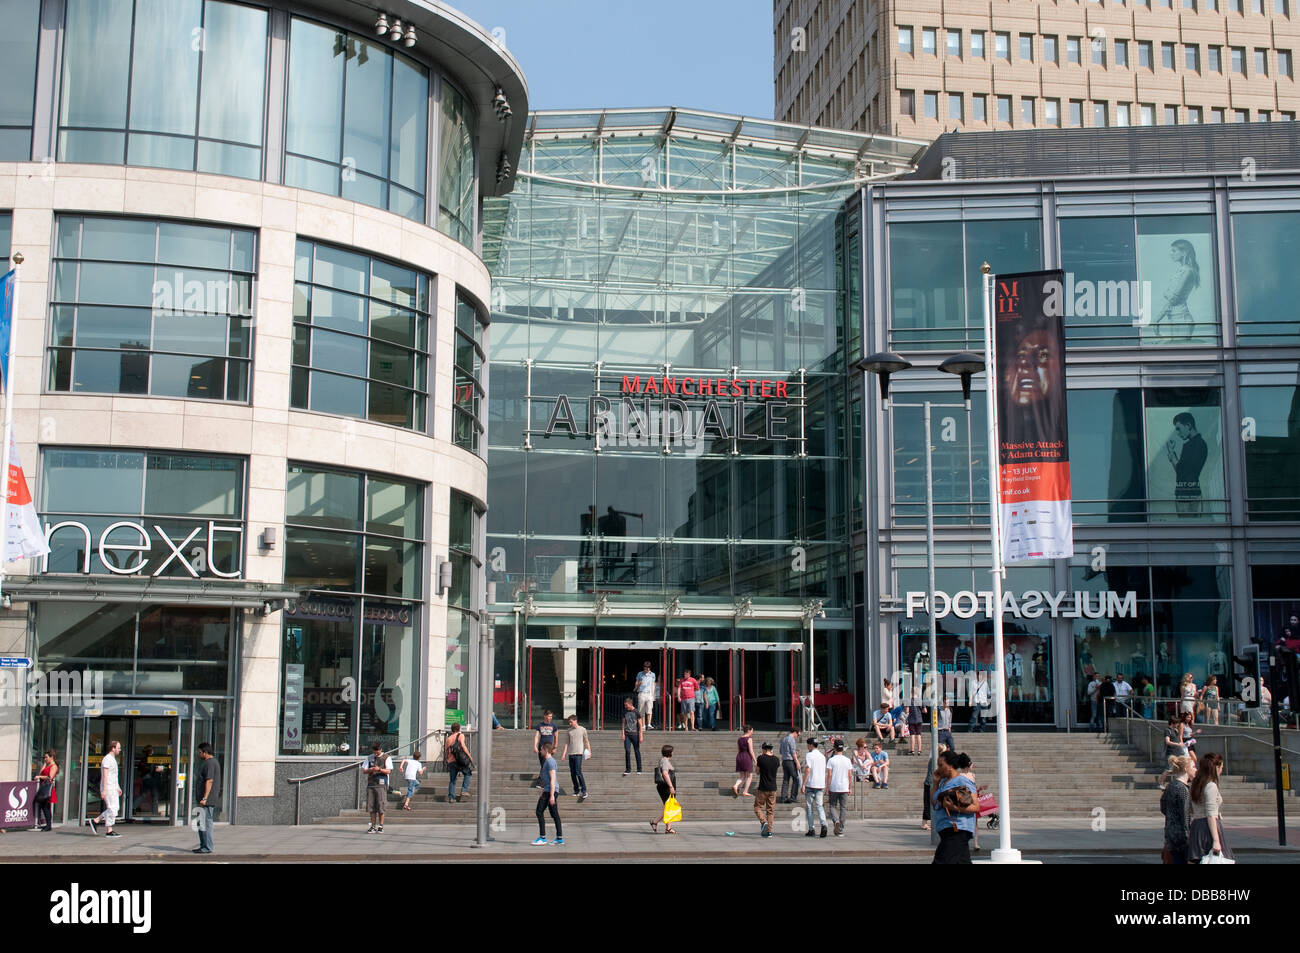 Exchange Square with Arndale Shopping Centre, Manchester, UK Stock Photo